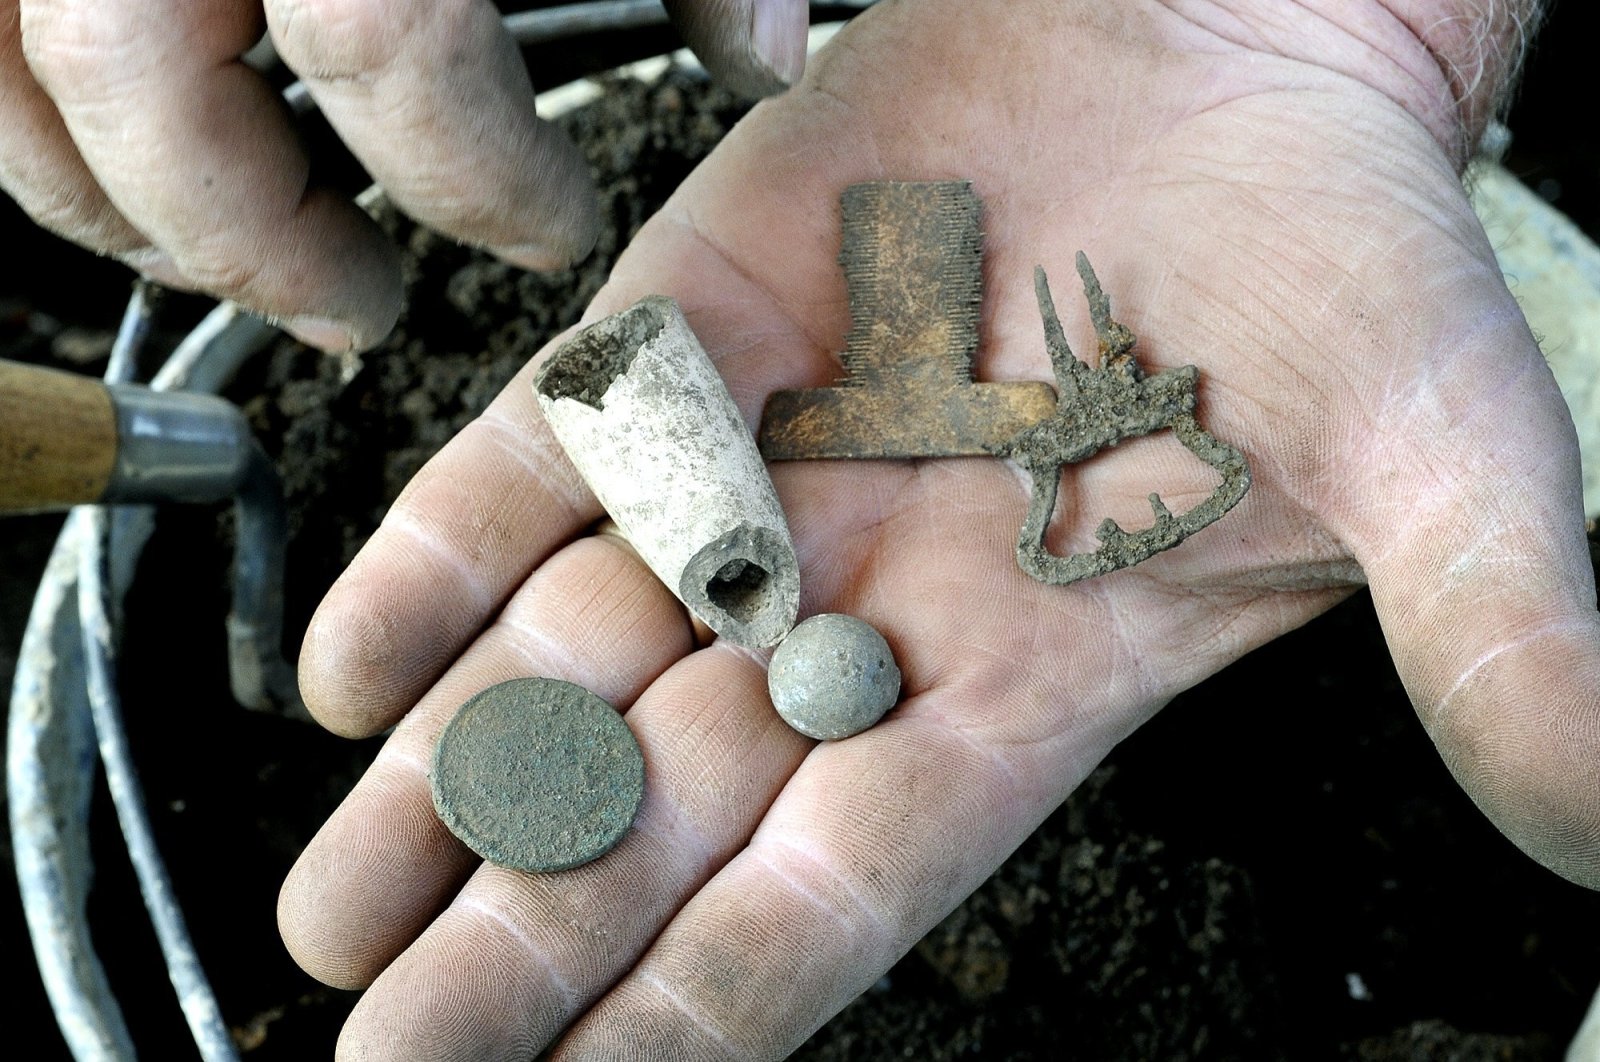 A similar historical coin (Bottom-L) from around the same period in the U.S. seen with other items archaeologists found at a dig site at Colonial Pemaquid State Historic Site, Bristol, Maine, U.S, July 25, 2013. (Portland Press Herald via Getty Images)